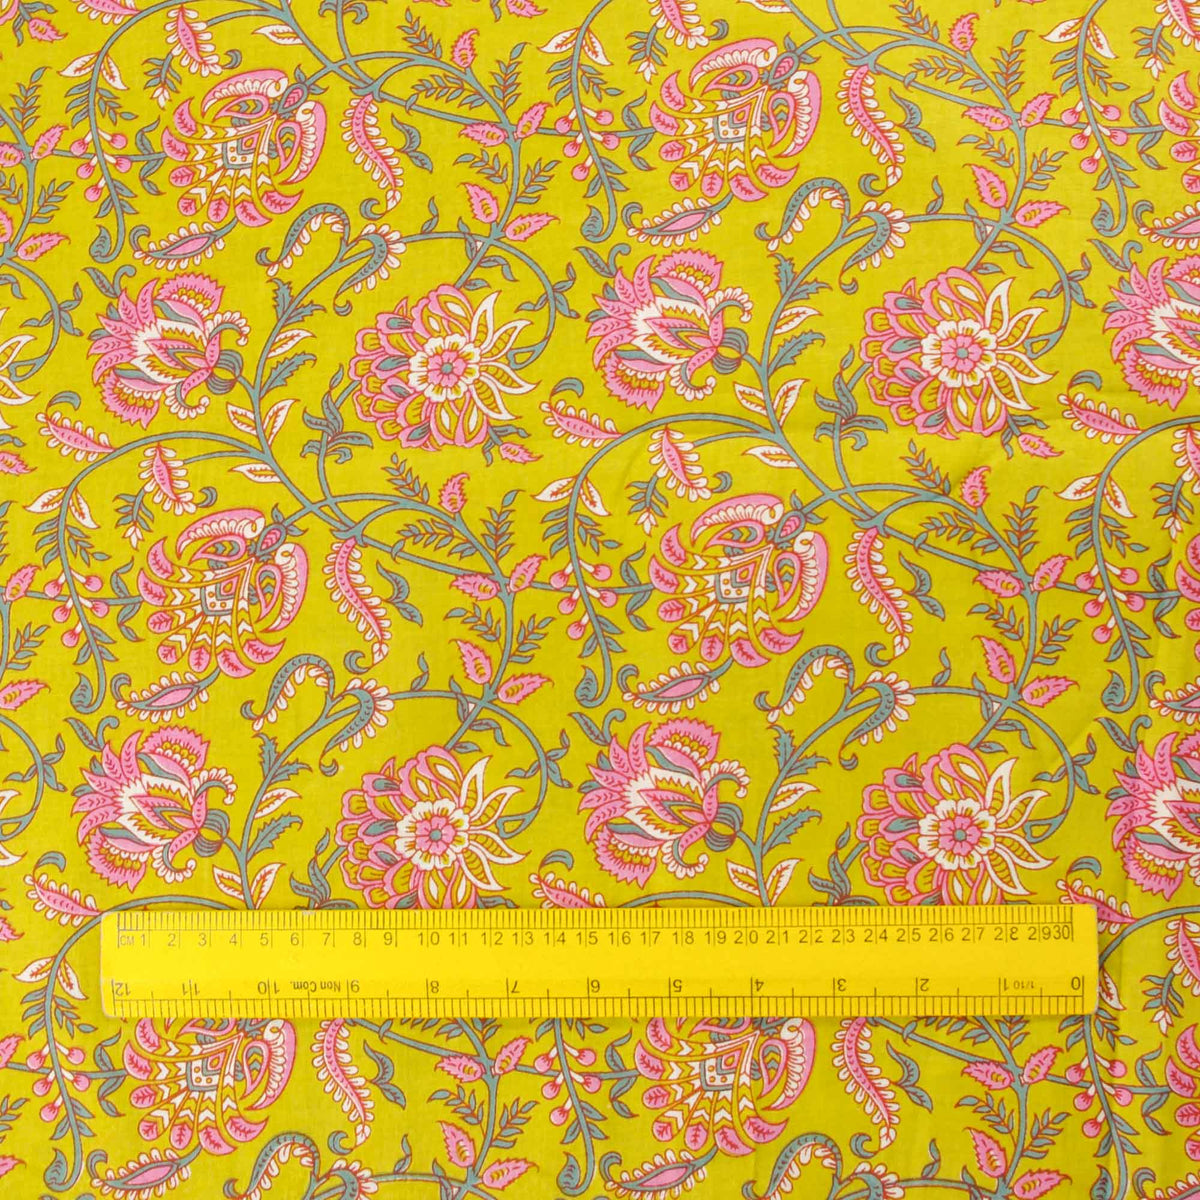 Hand Screen Printed 100% Cotton Fabric - Pink Carnation On Green (Design 377)